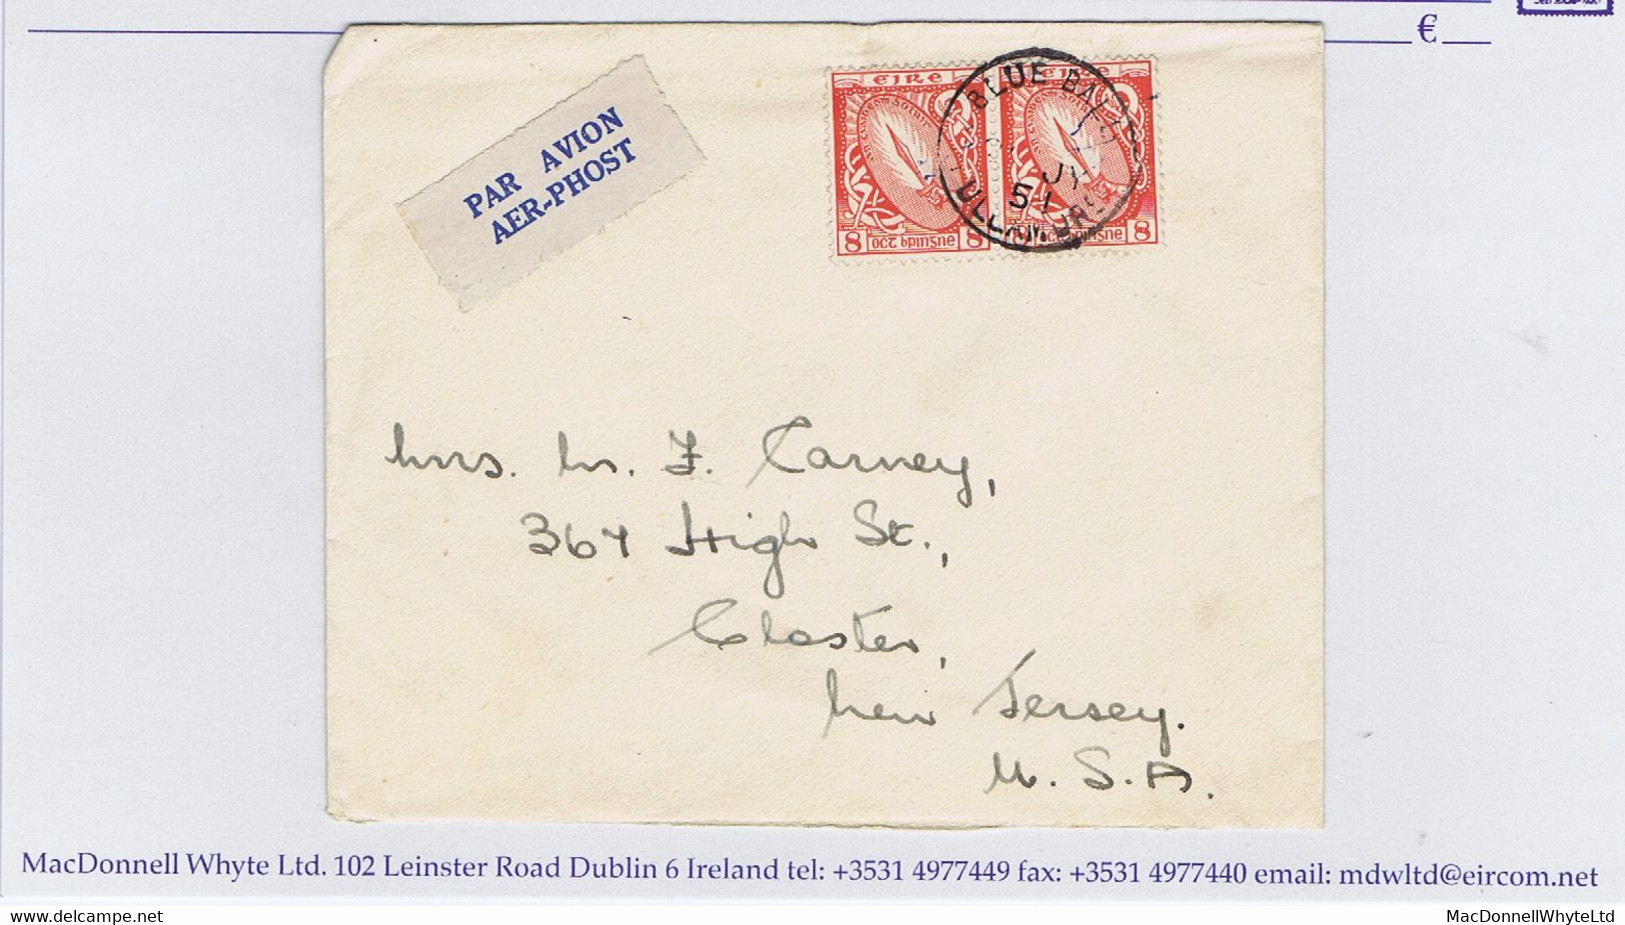 Ireland Airmail Offaly 1s4d Rate 1949 8d Sword Pair Paying 16pence Airmail Rate On Cover To USA Tied BLUE BALL Cds - Poste Aérienne